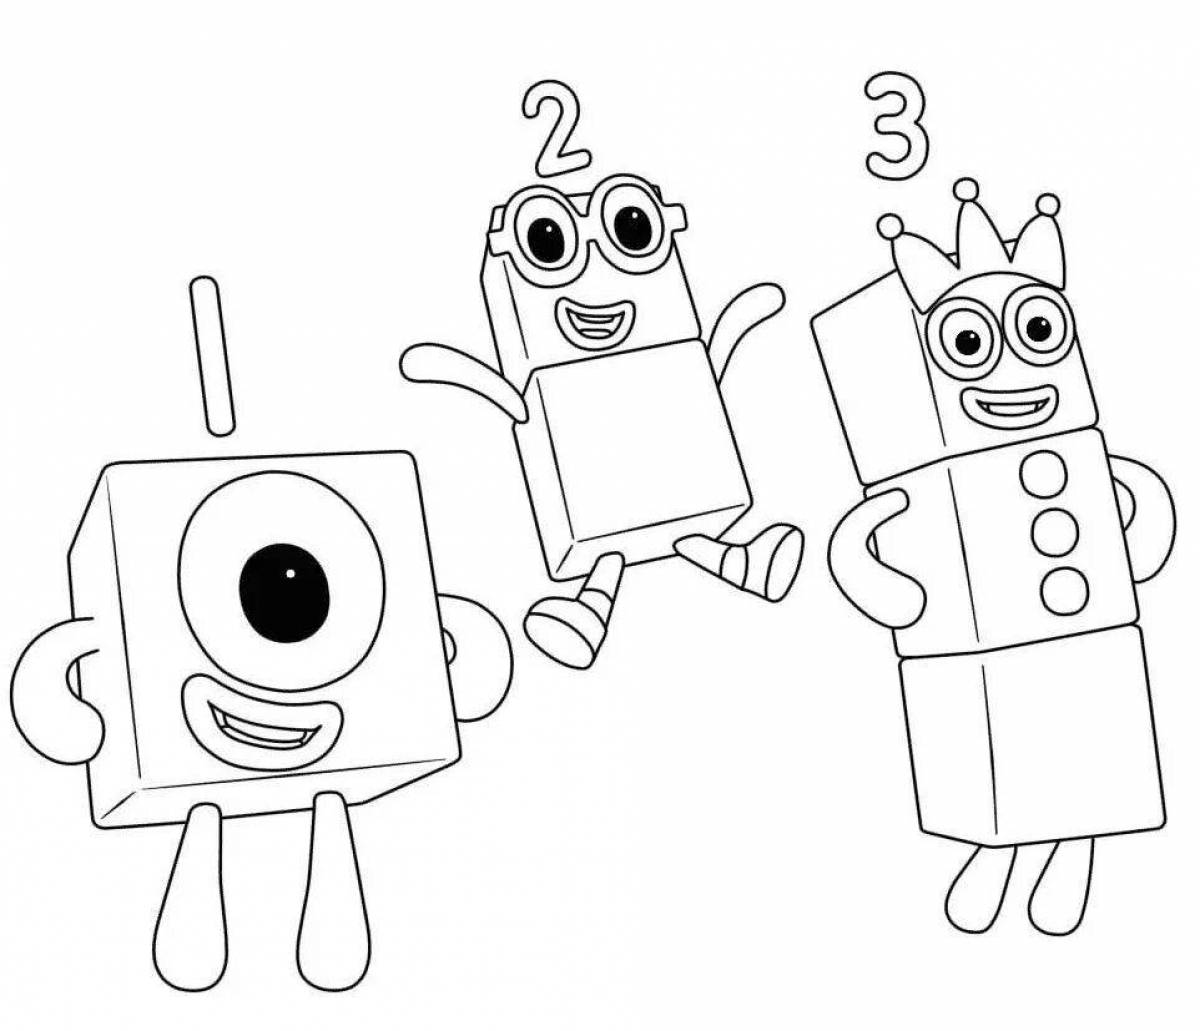 Adorable number block coloring page